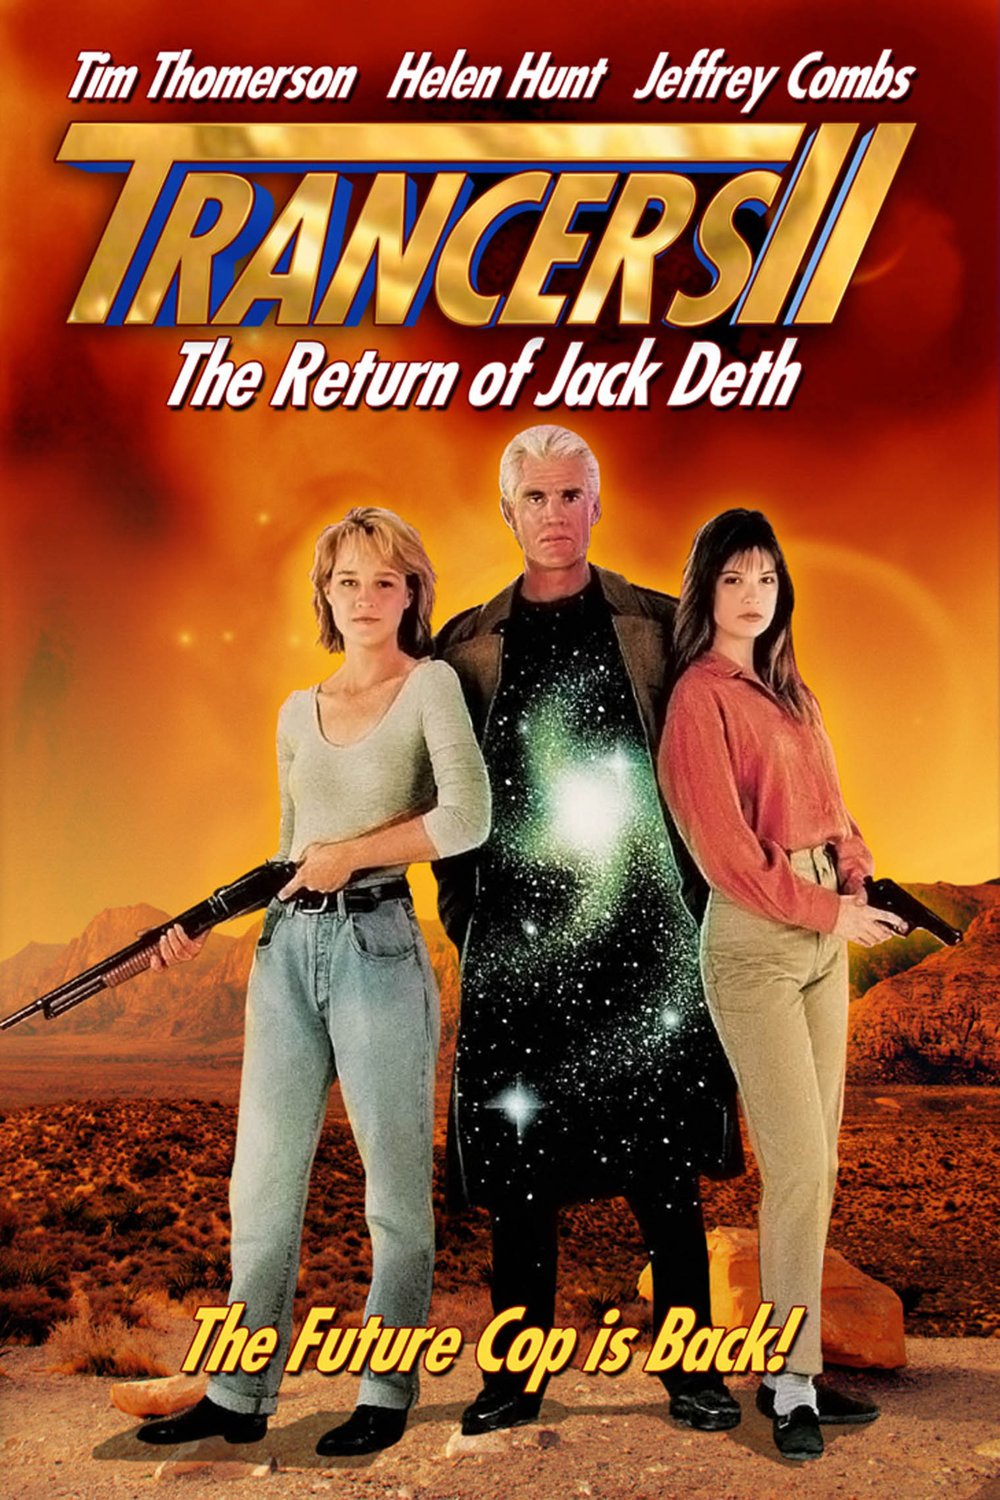 Poster of the movie Trancers II: The Return of Jack Deth